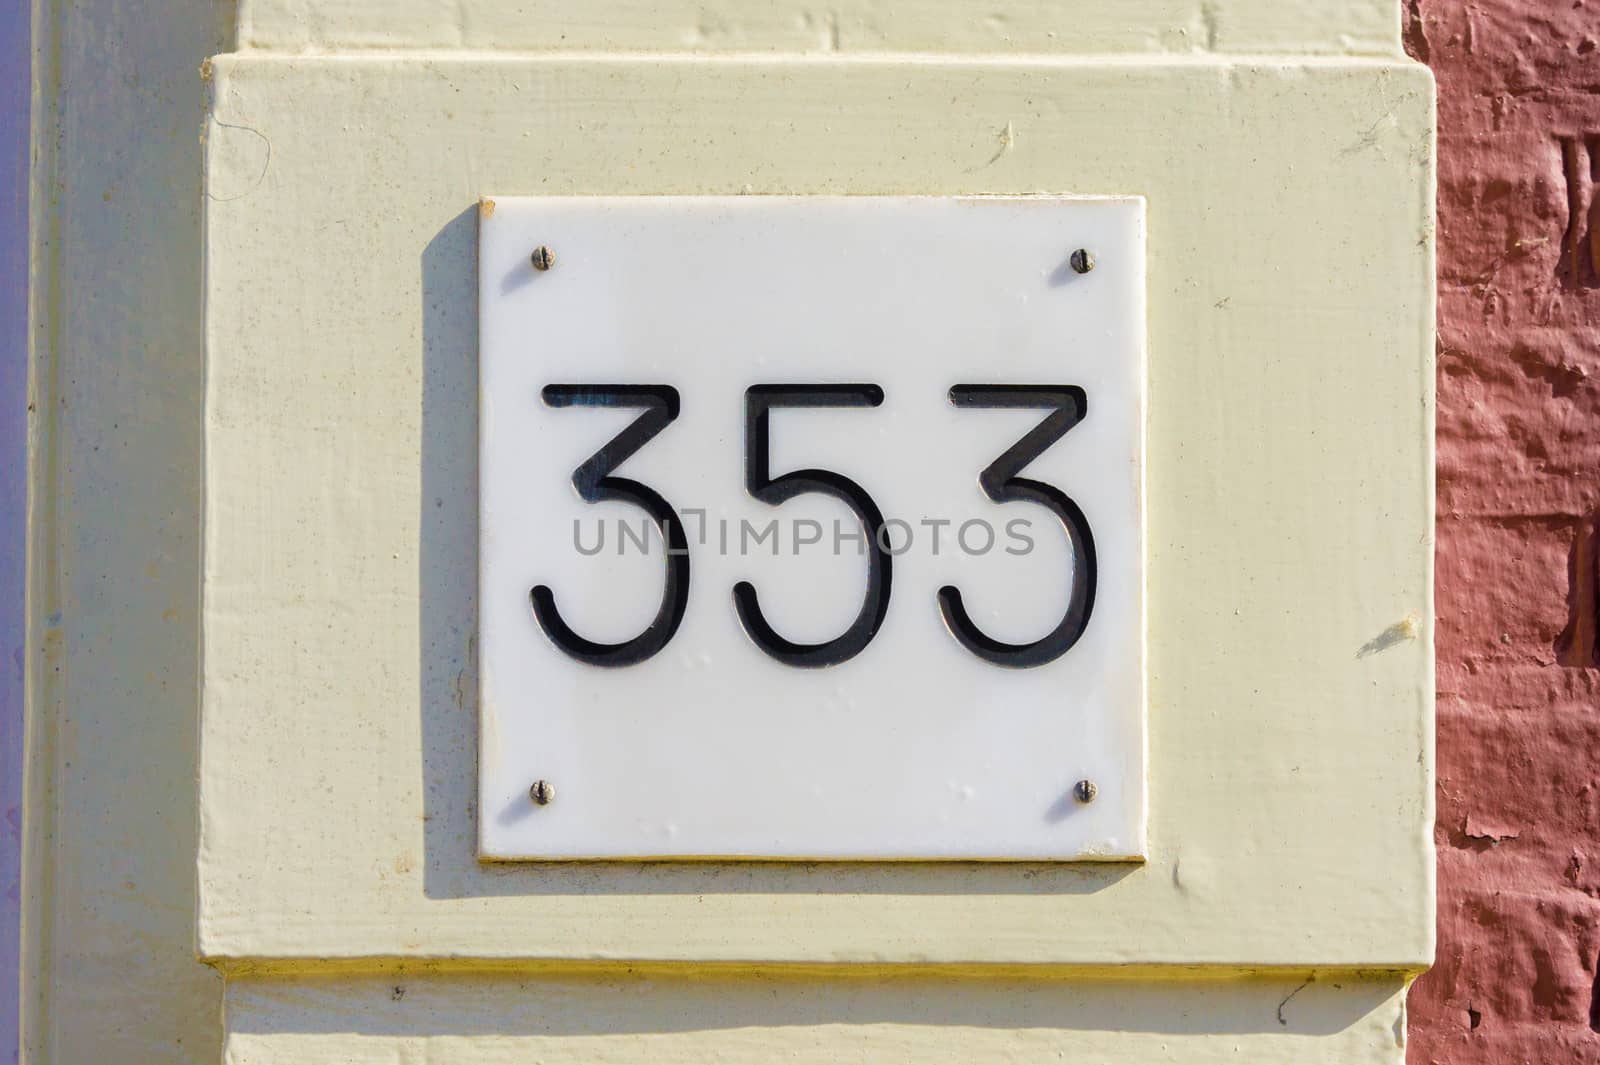 House number thee hundred and fifty three (353)